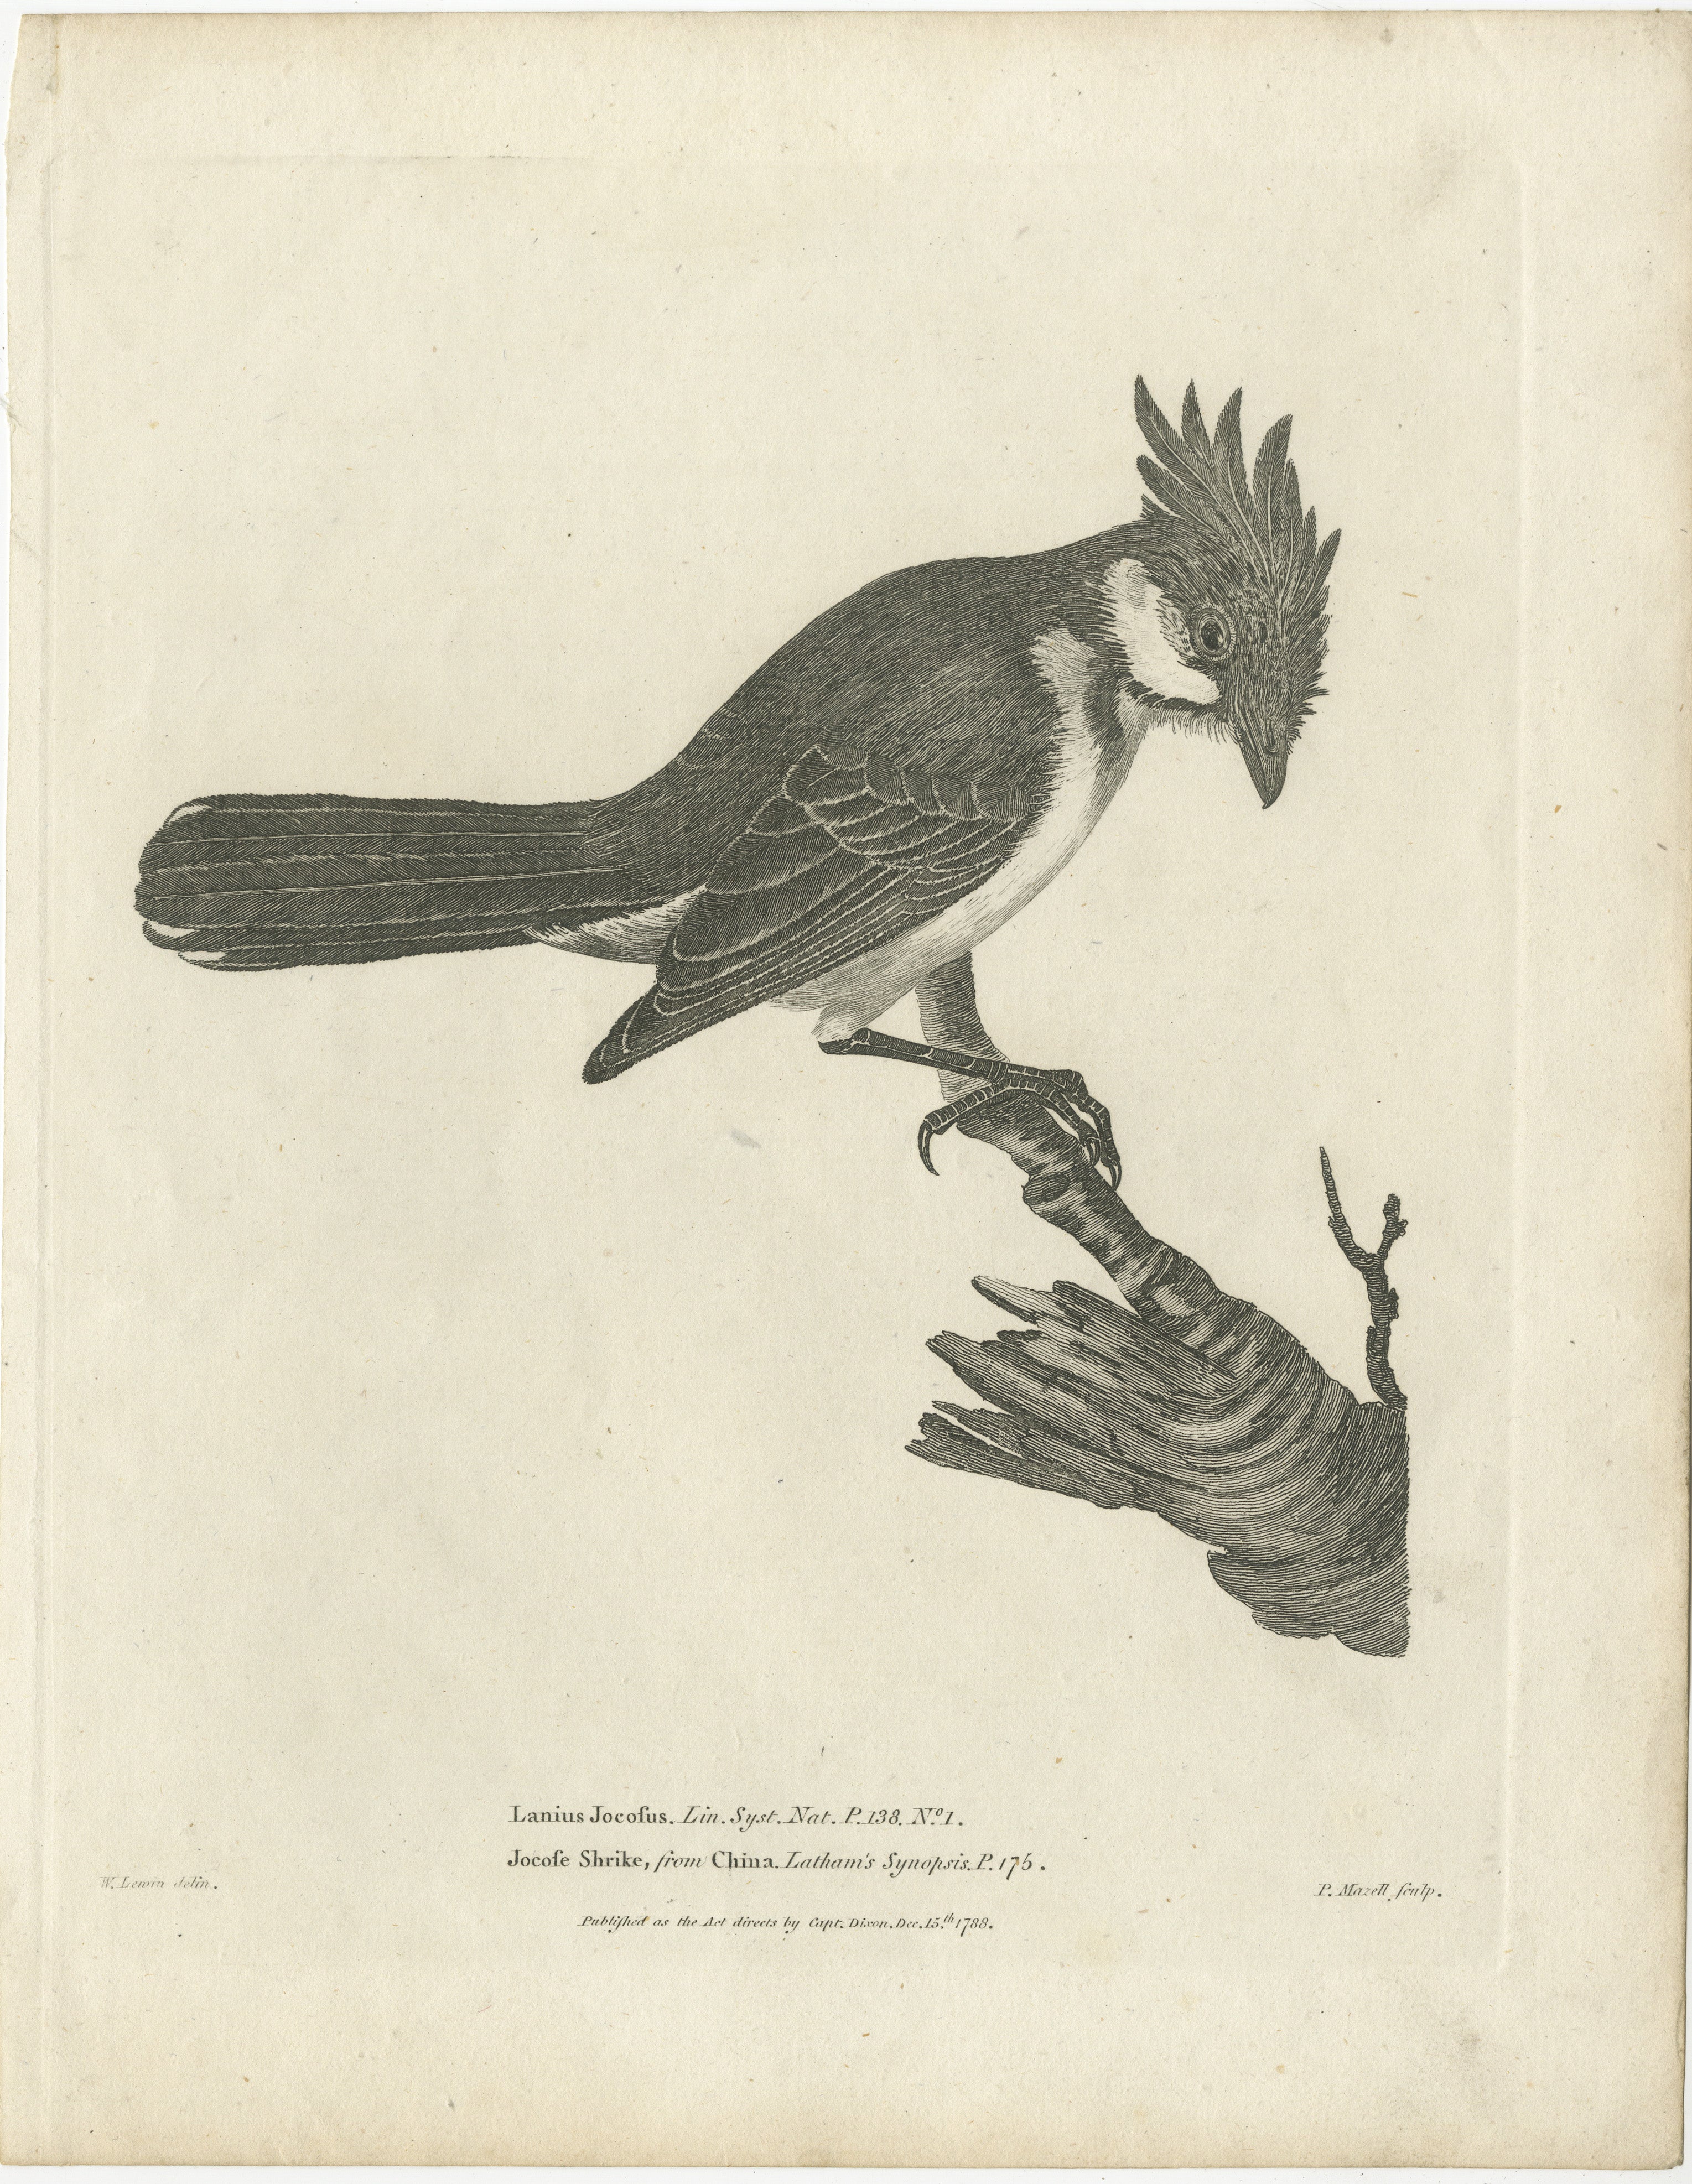 An old engraving depicting the red-whiskered bulbul, also known by the scientific name Pycnonotus Jocosus. This bird species, native to Asia, is renowned for its distinctive appearance and has been mentioned in various scientific works dating back